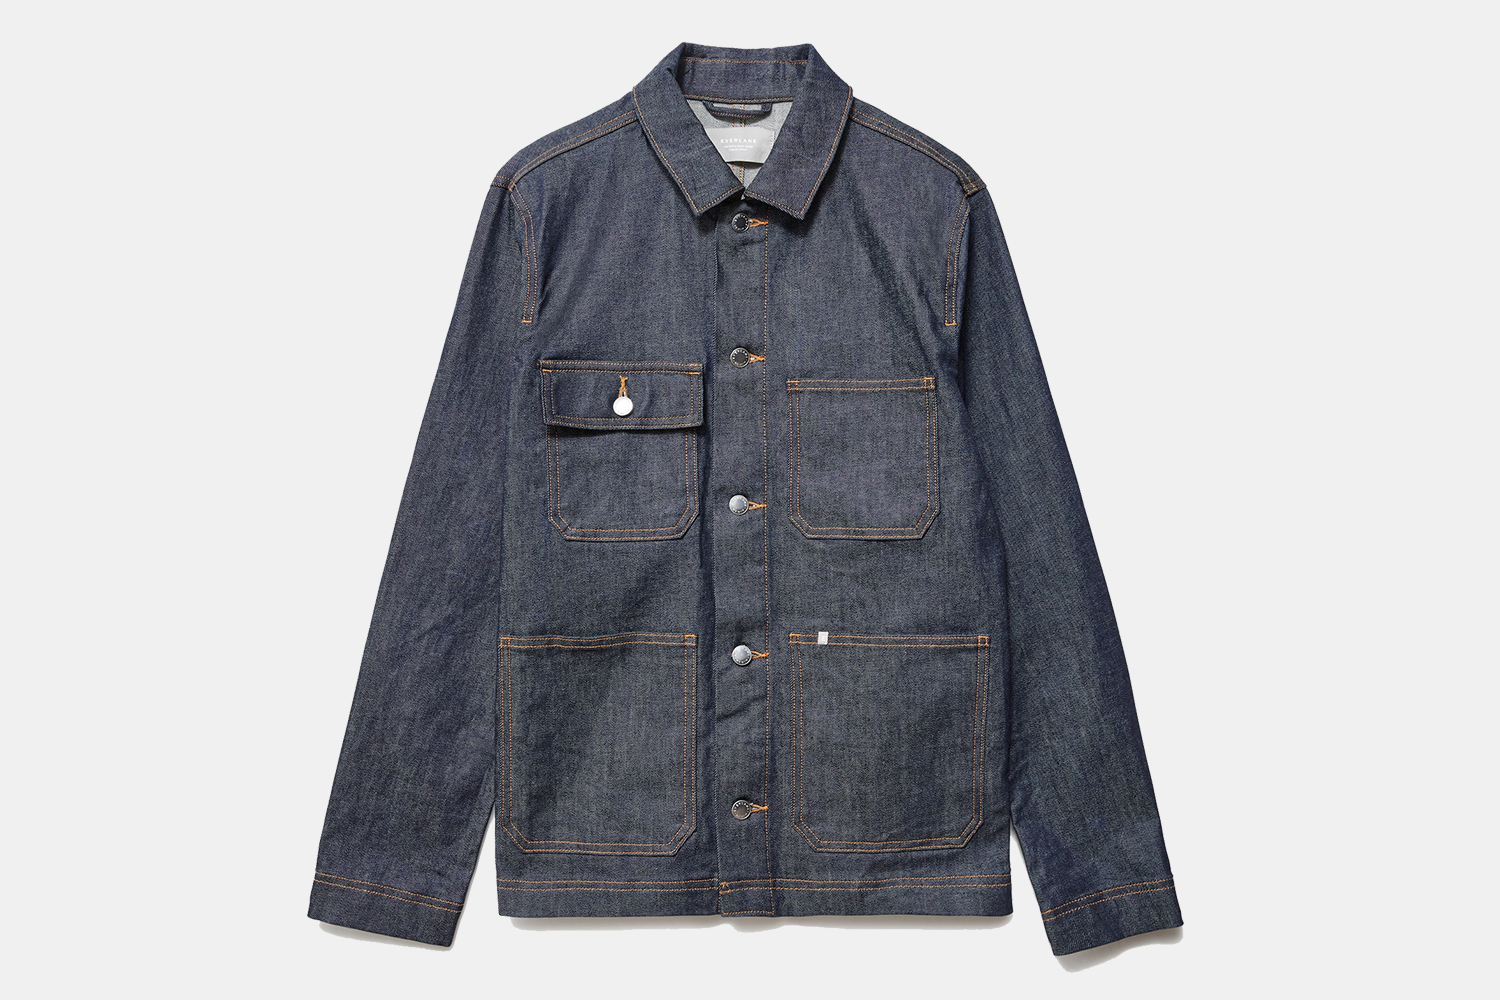 The Denim Chore Jacket from Everlane on a grey background